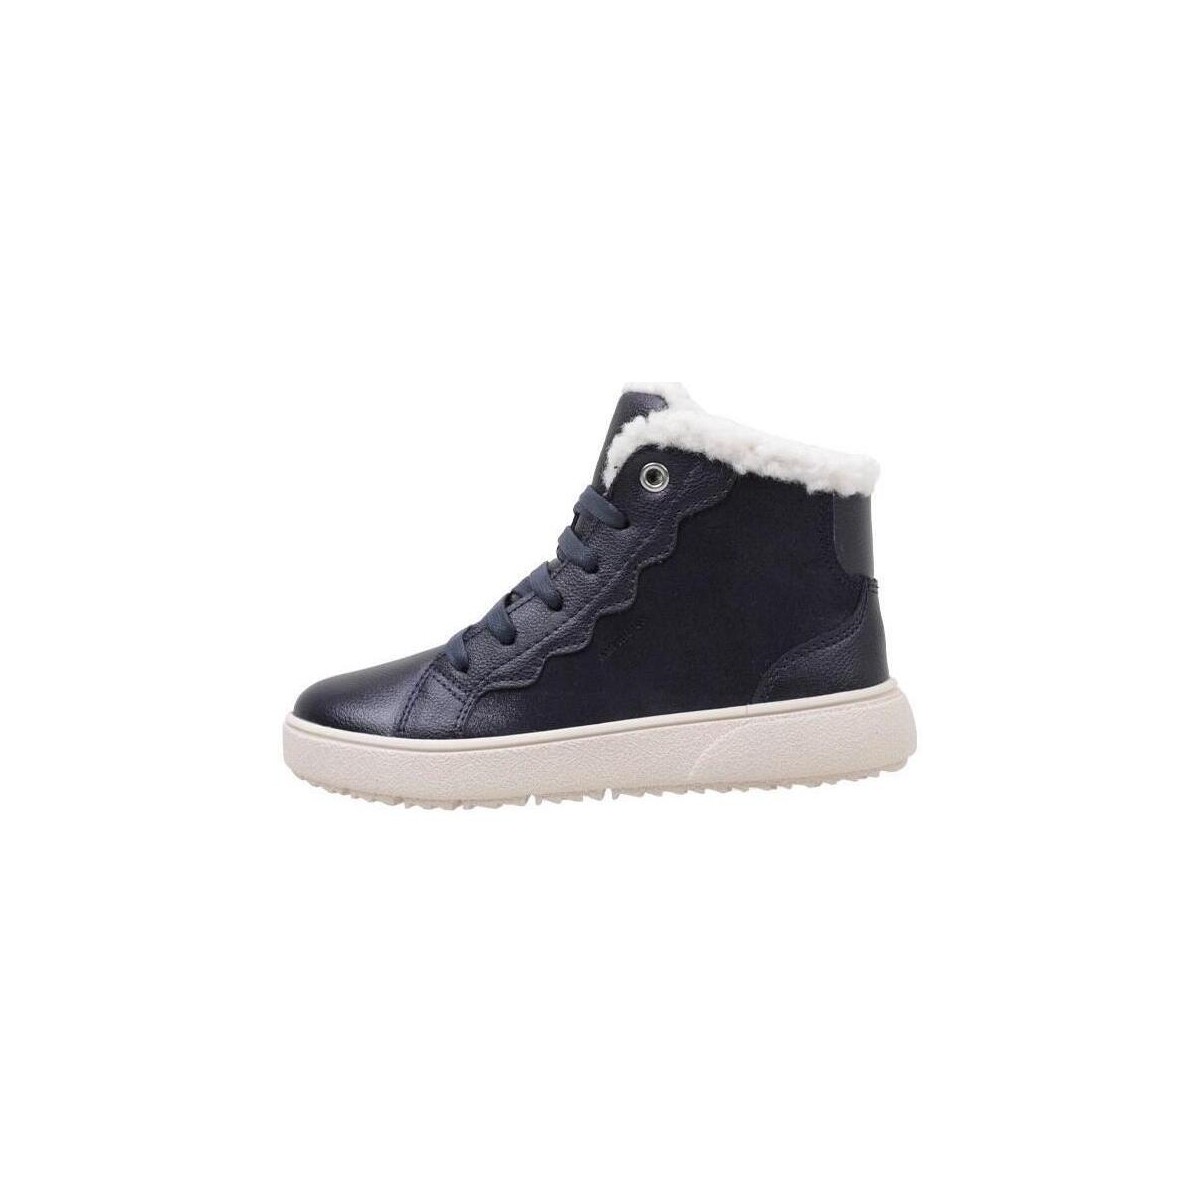 Chaussures Fille Baskets montantes Geox J THELEVEN B ABX B Marine